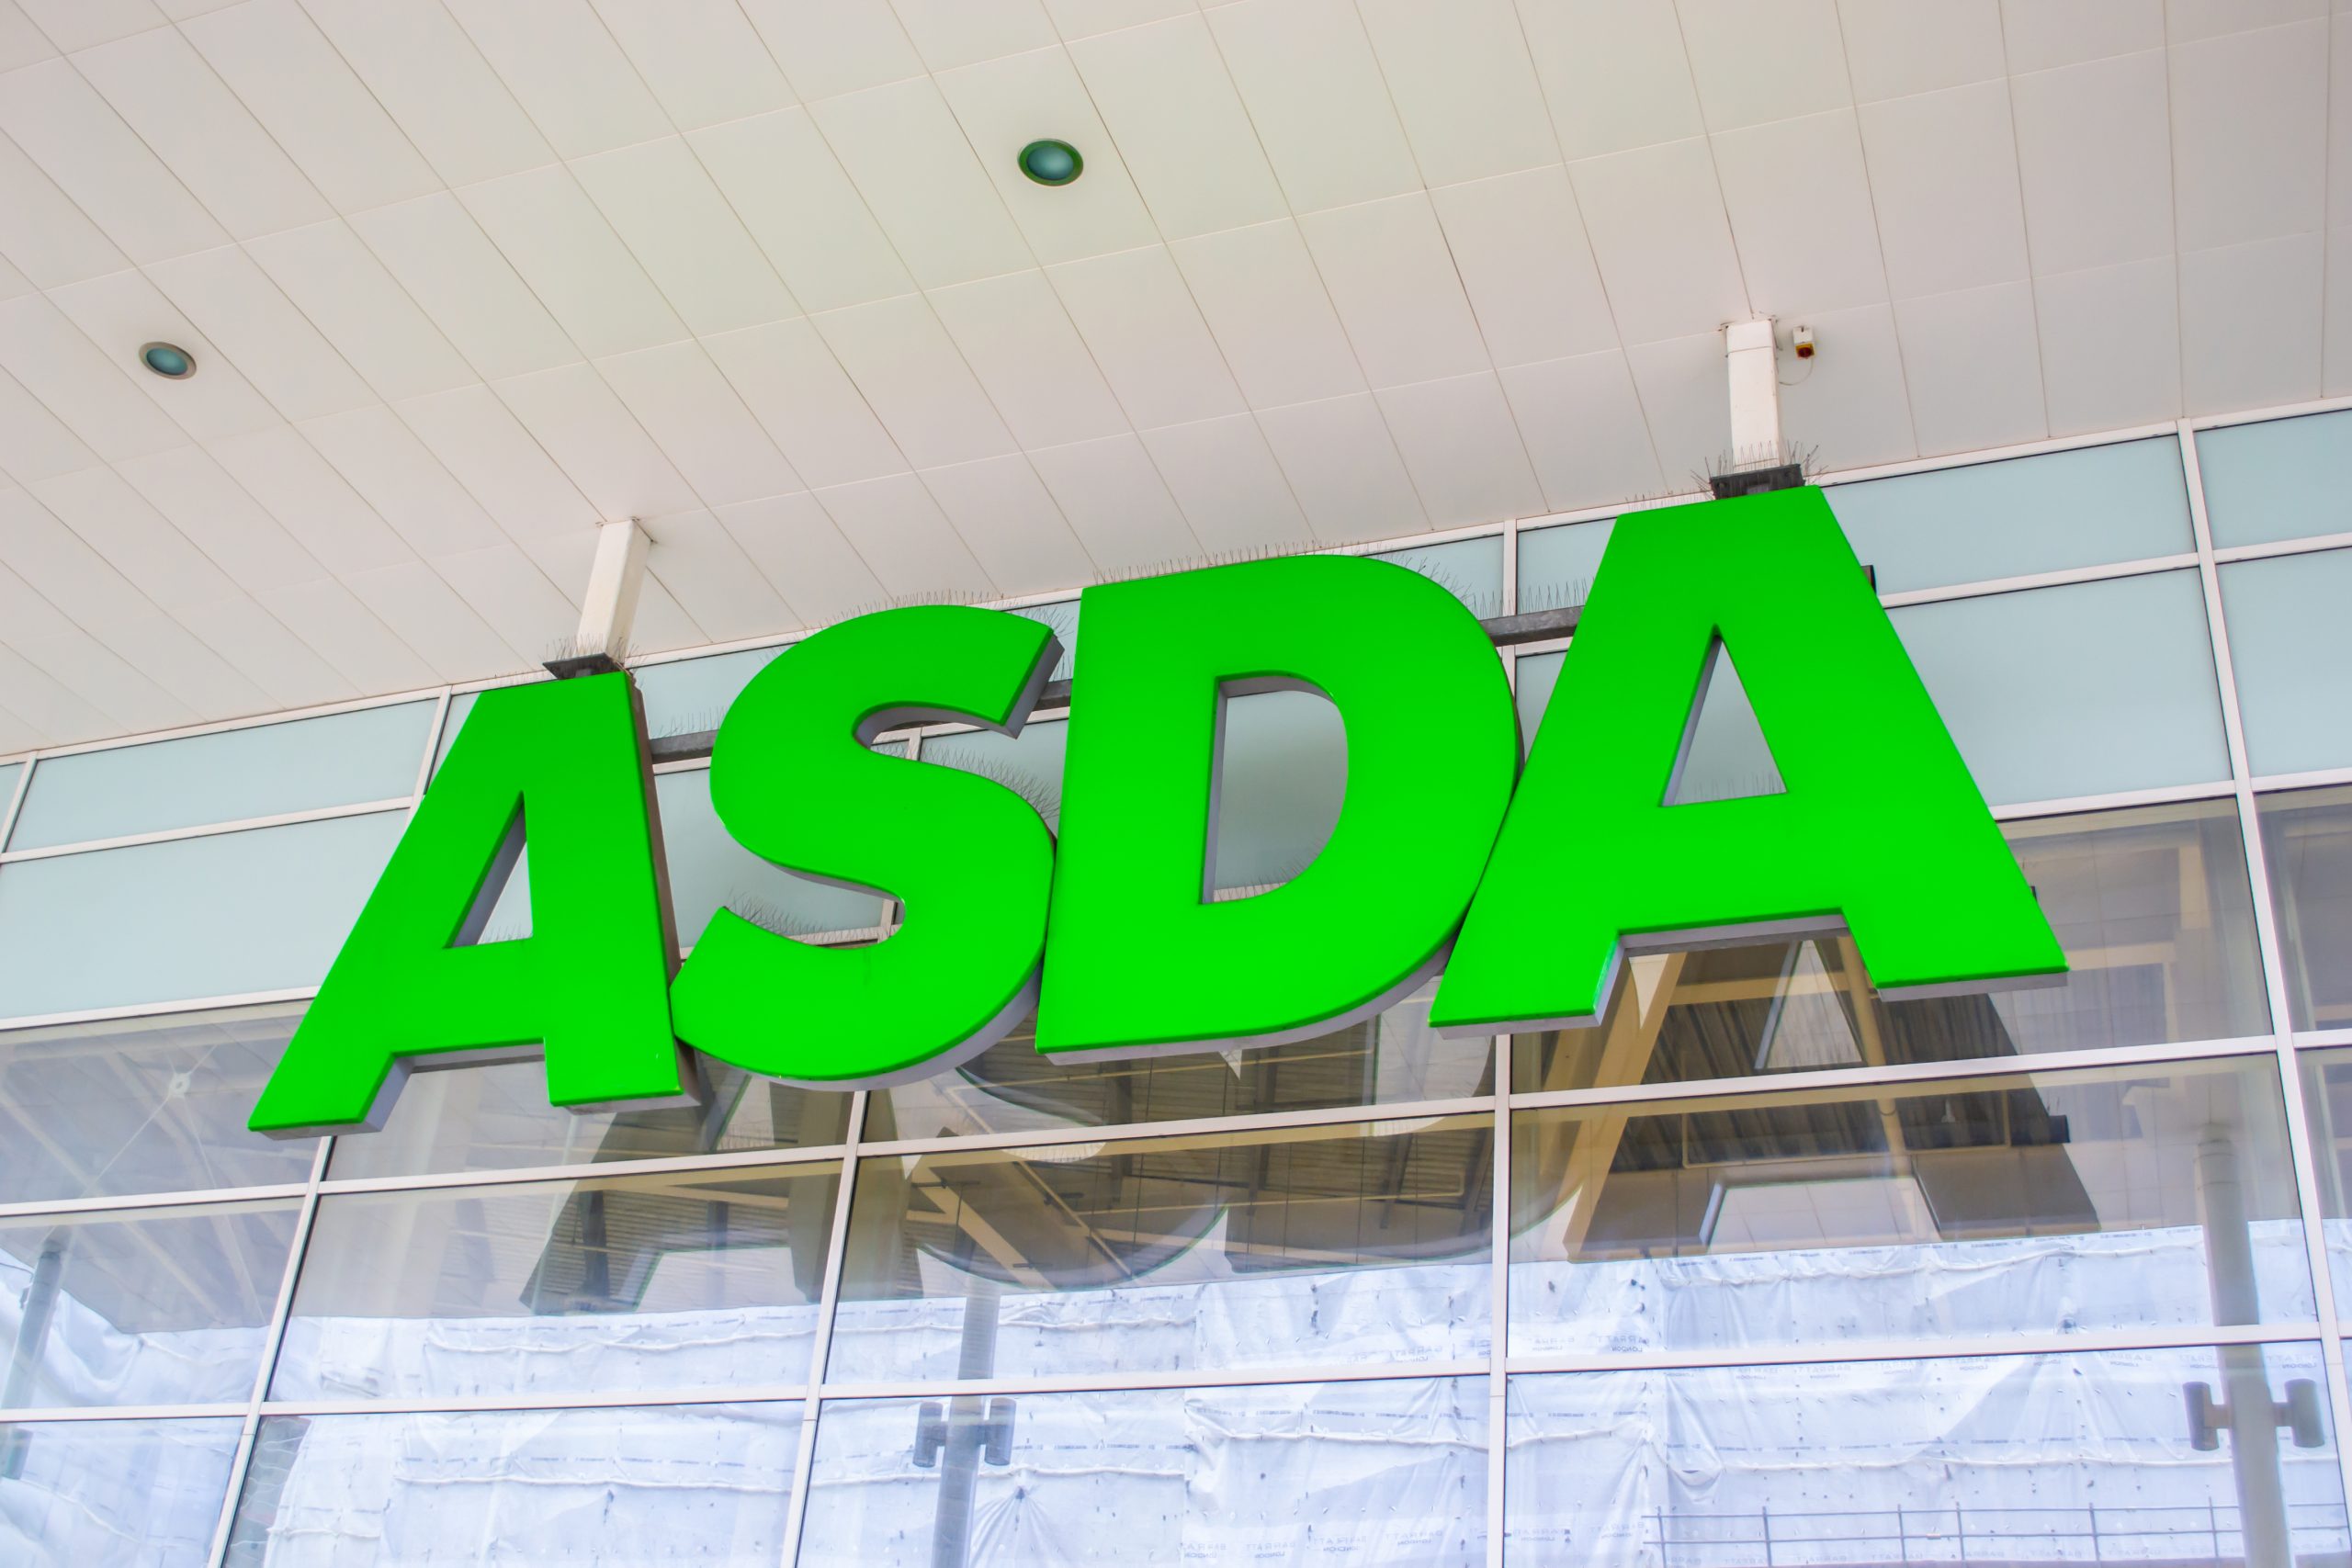 Community consultation opens on new Asda store at Ballydugan Retail Park